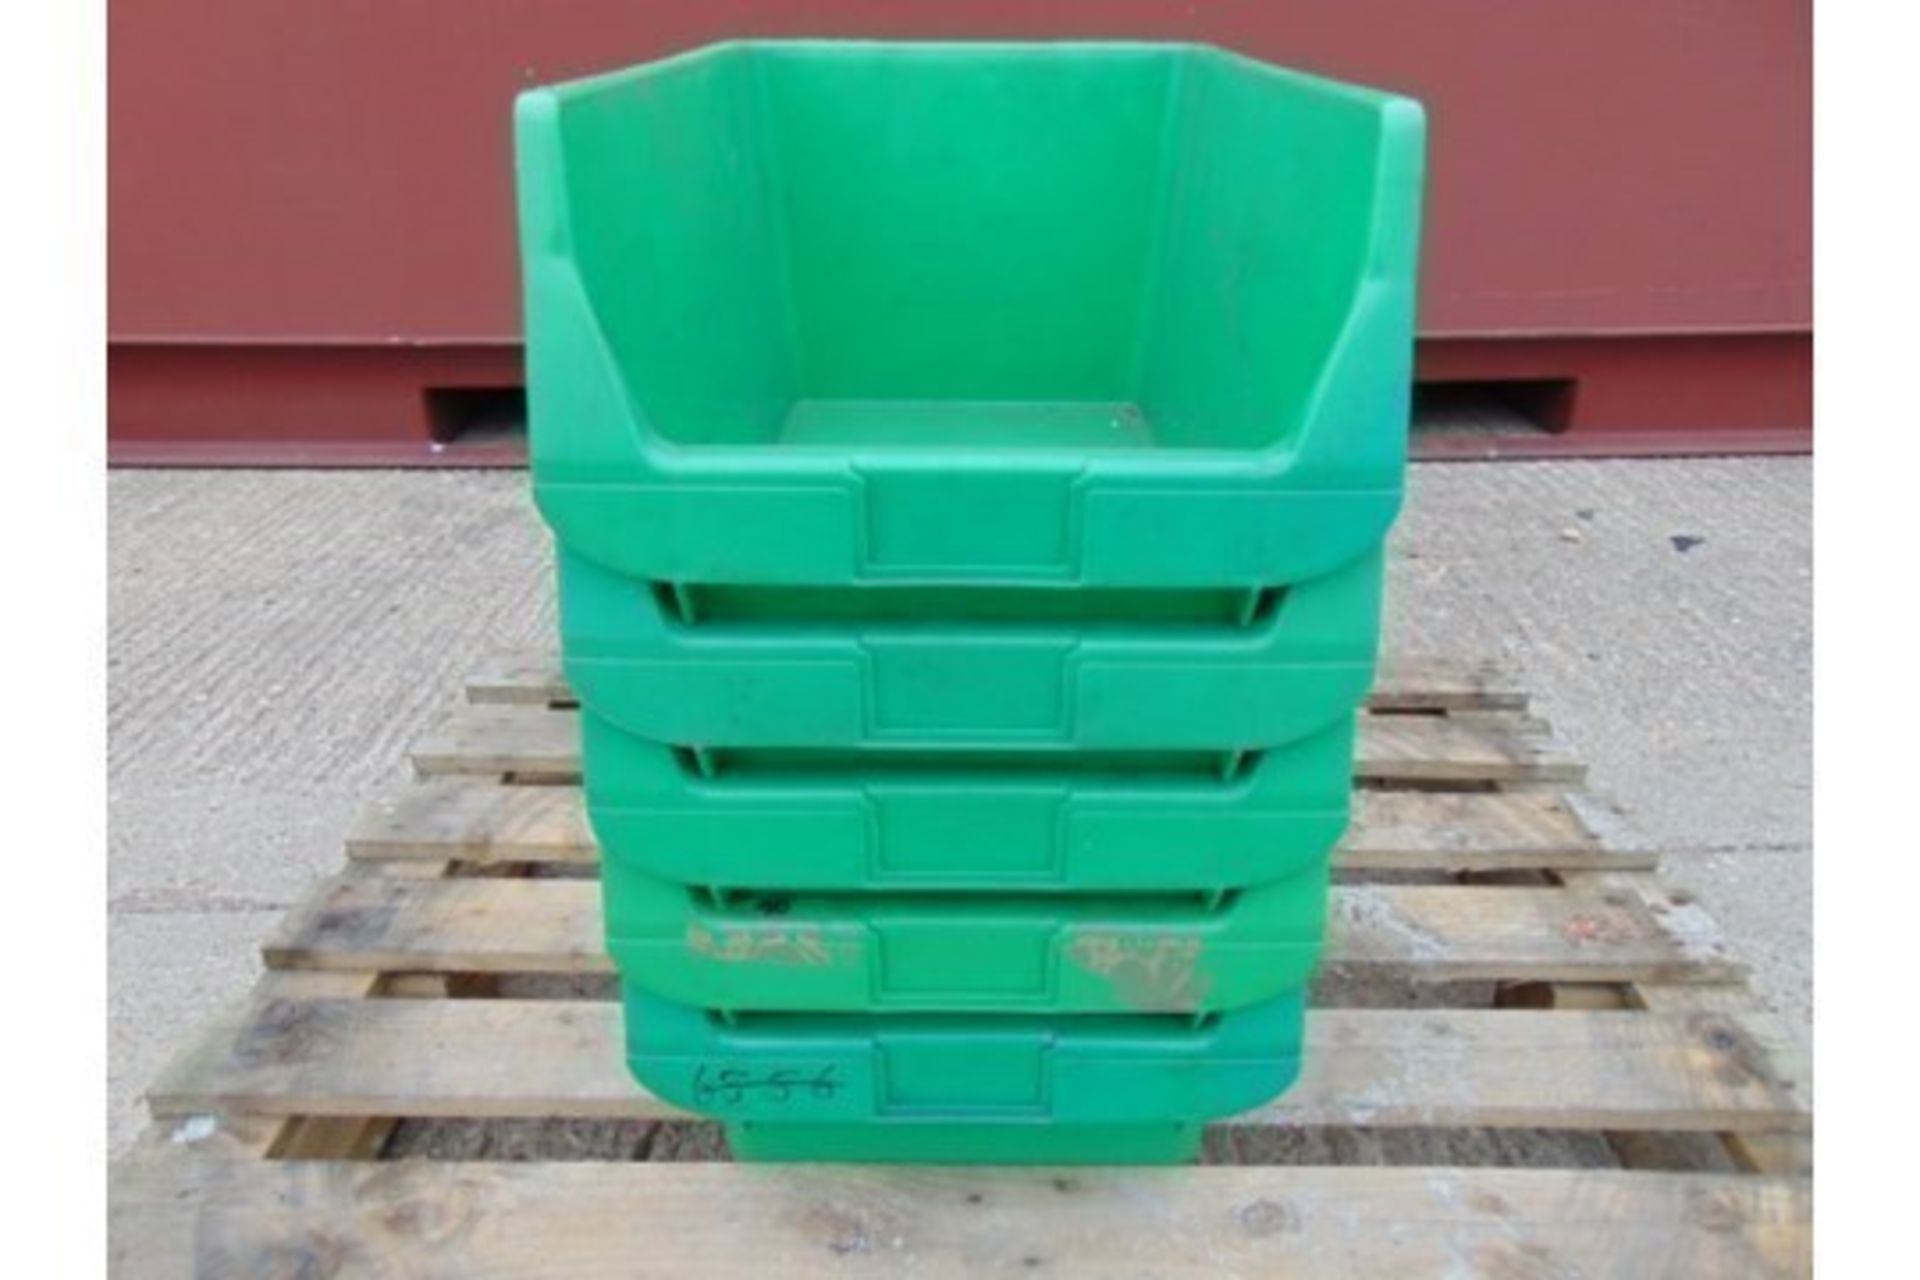 5 x Schafer Pew W50 Parts Storage Containers - Image 2 of 6